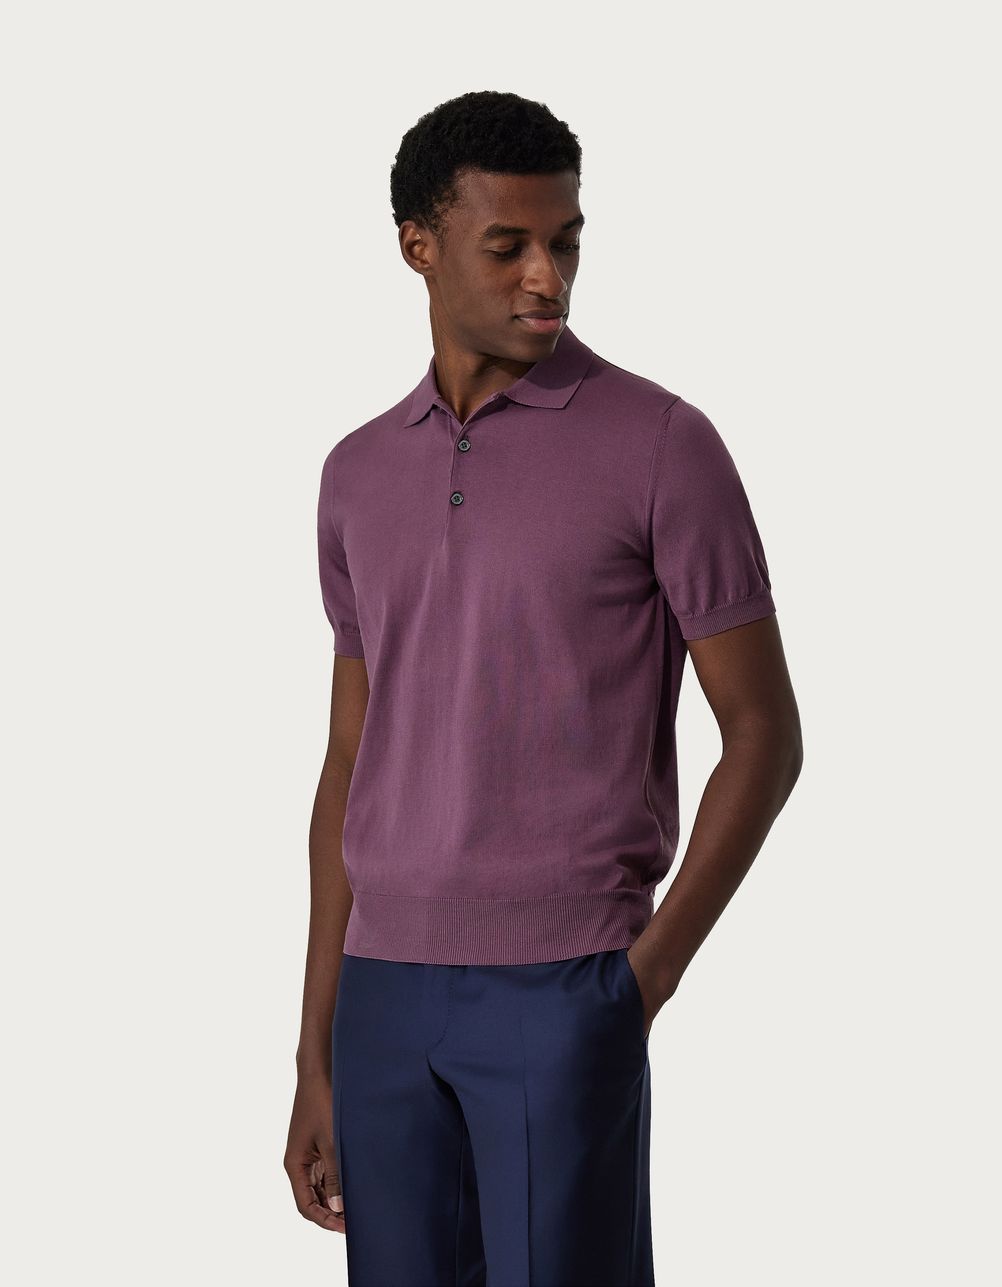 Mauve polo shirt in garment-dyed shaved cotton